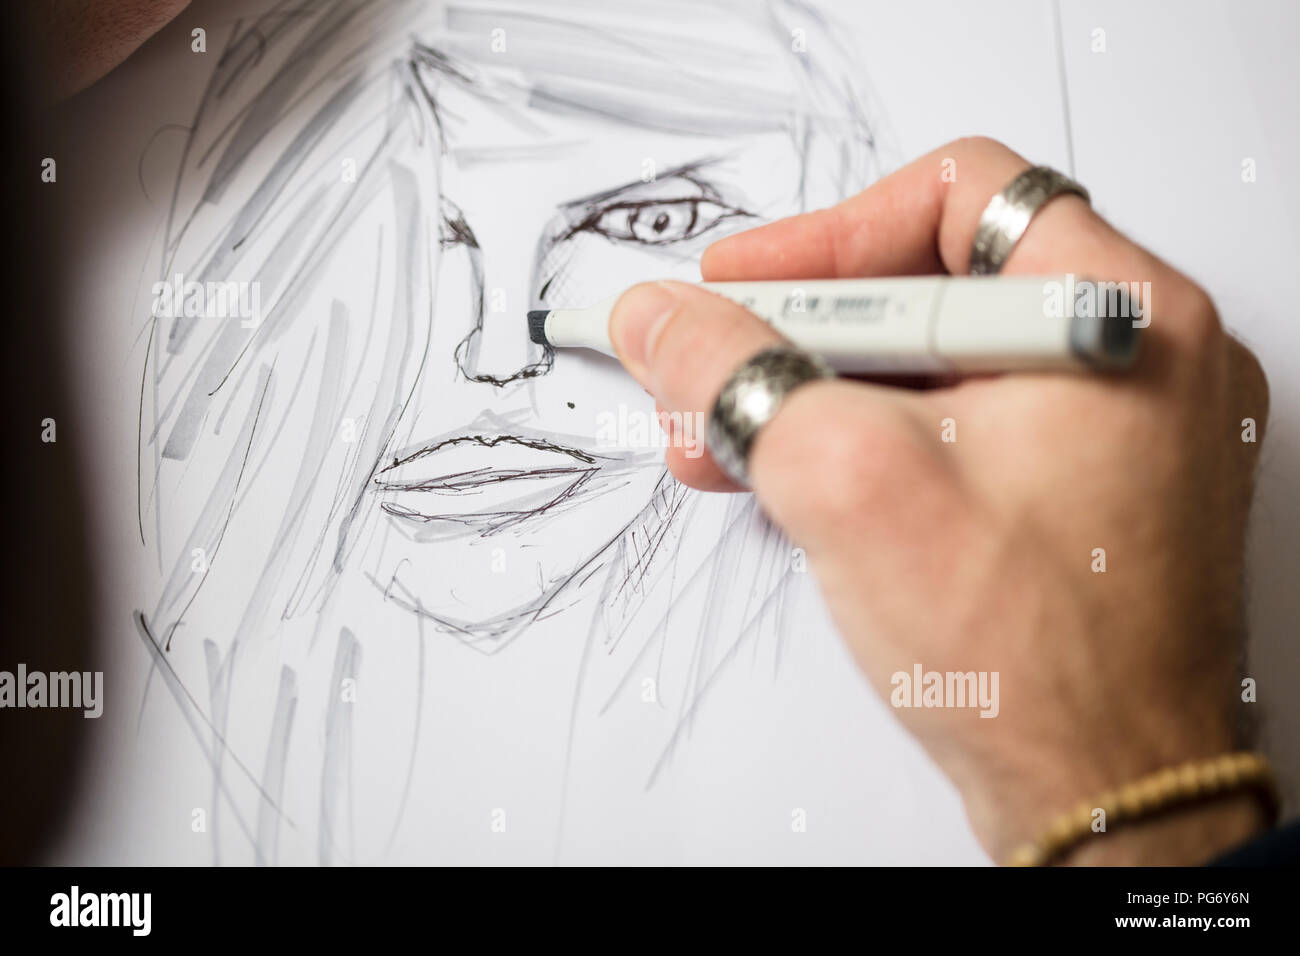 Close-up of artist drawing a sketch Stock Photo